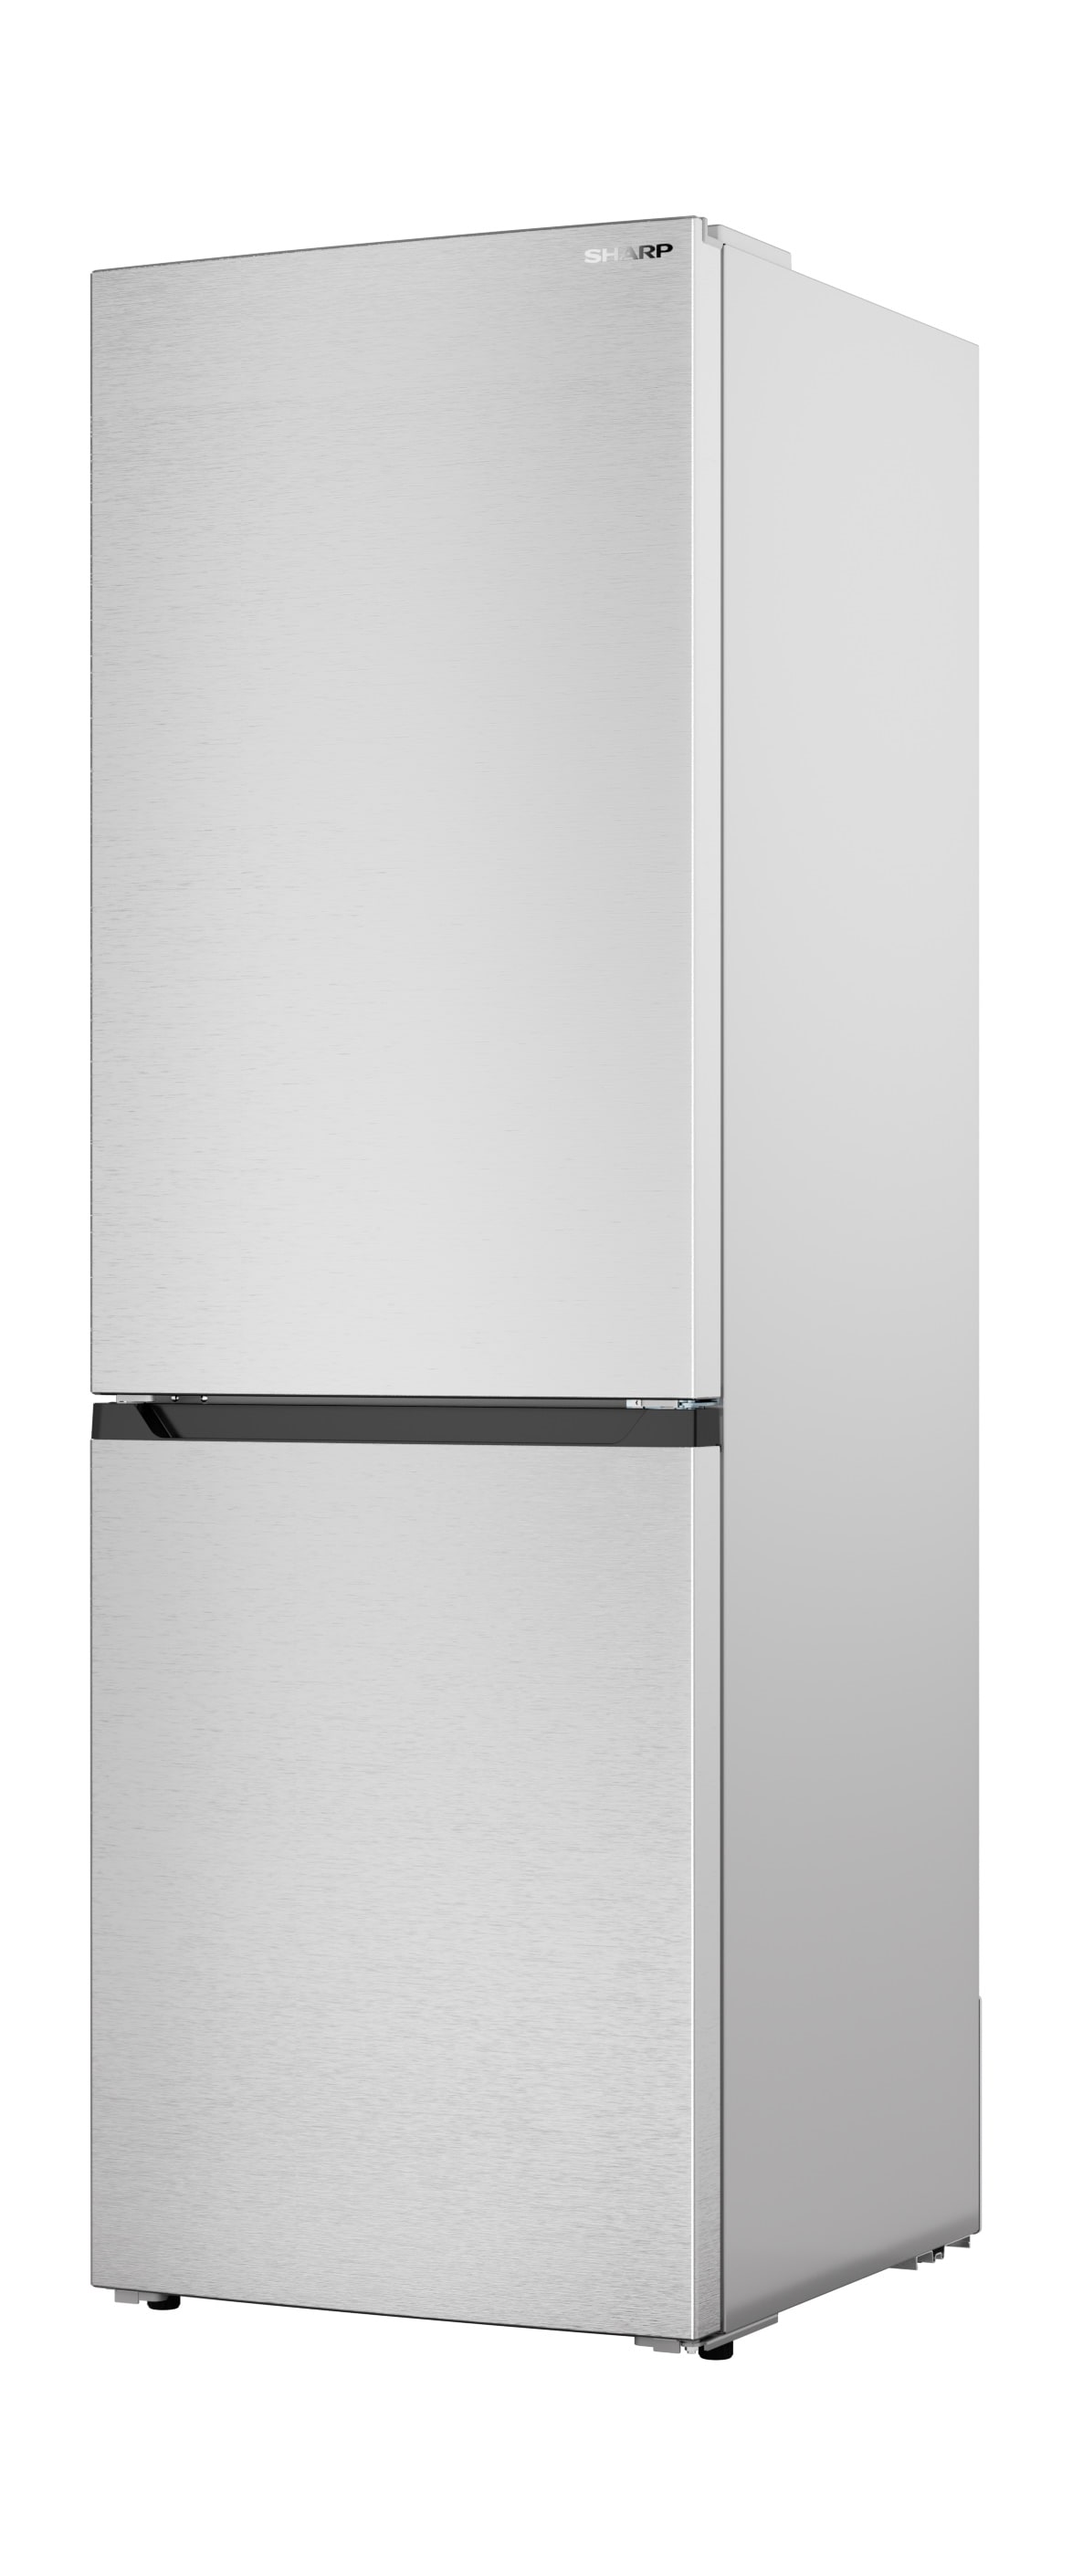 the Bottom-Freezer STAR Steel) in (Stainless department ENERGY Sharp 11.5-cu Refrigerator ft at Refrigerators Bottom-Freezer